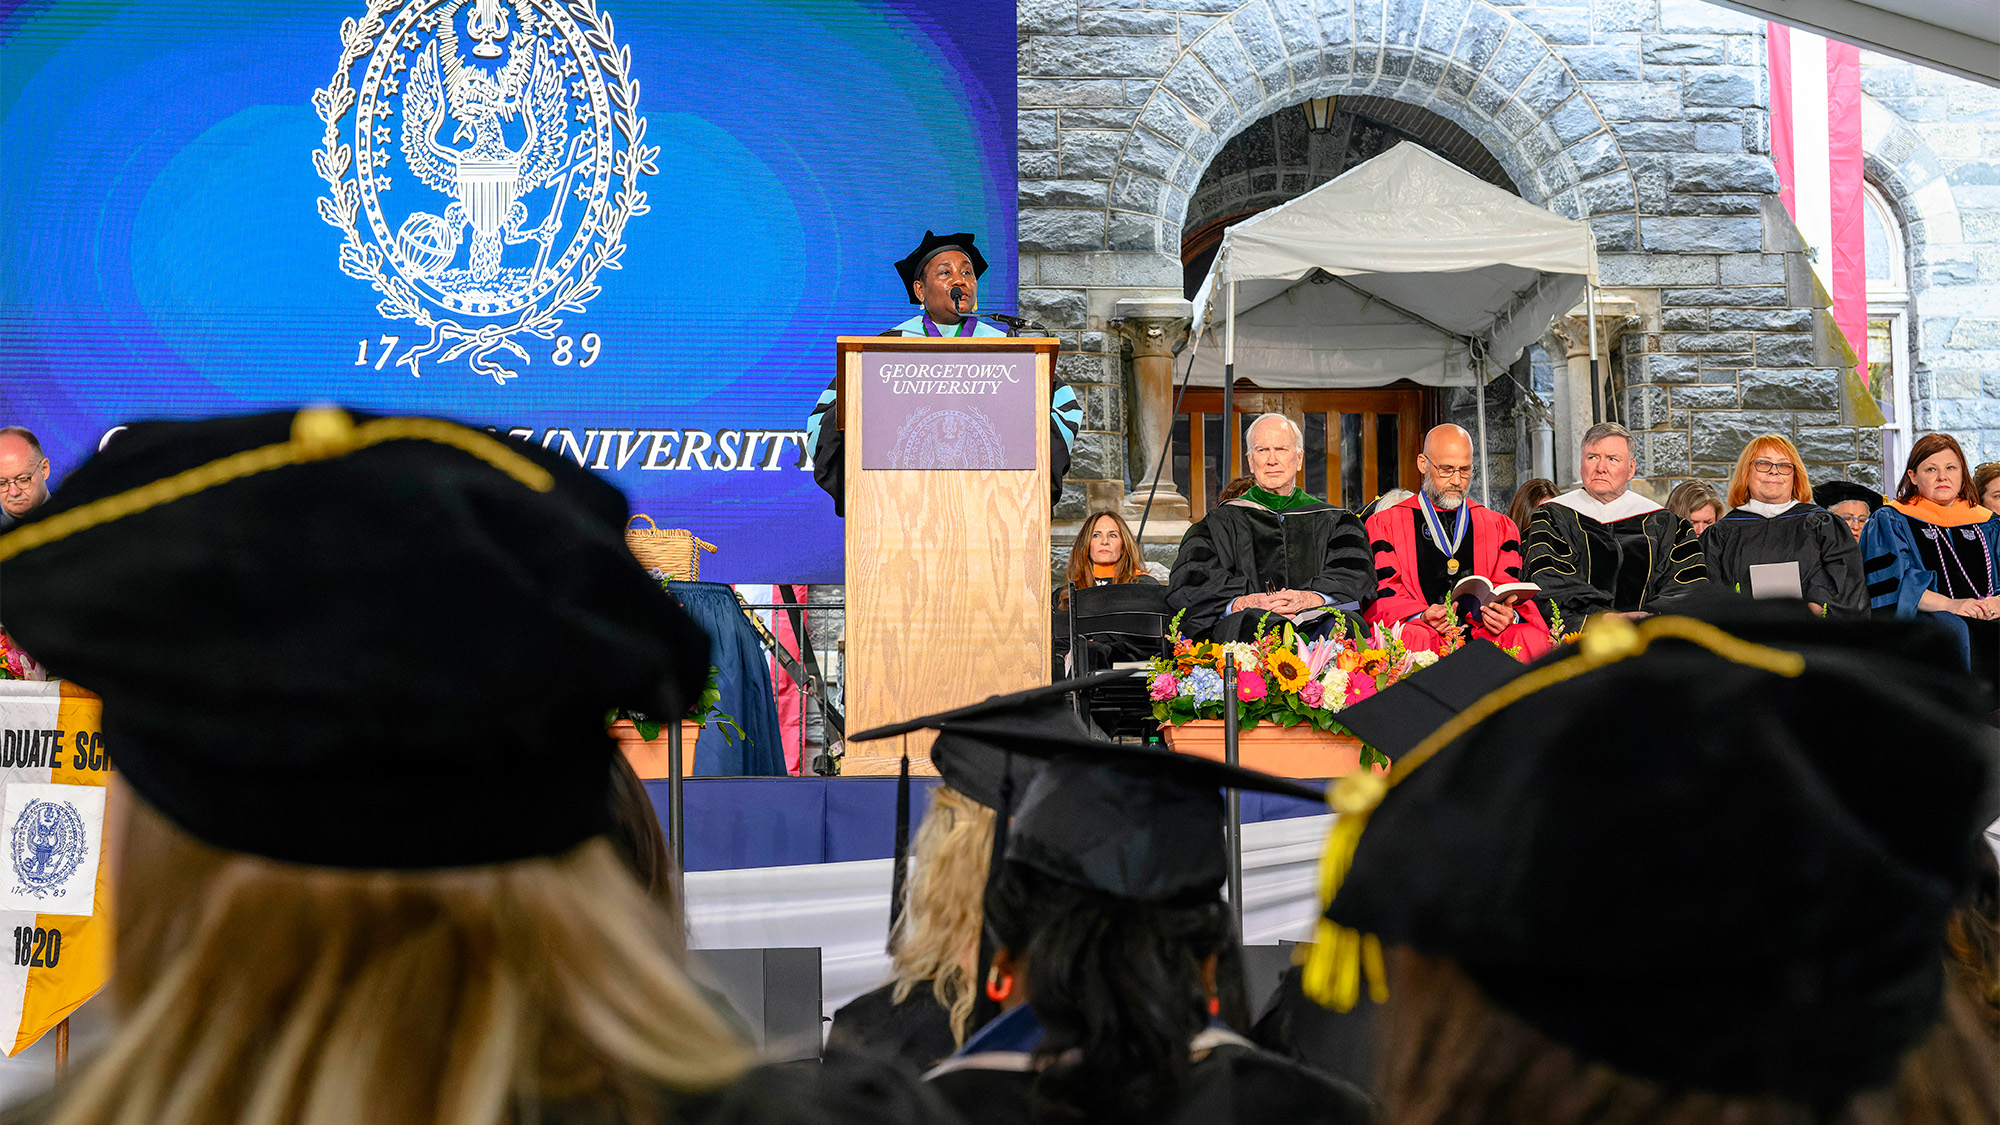 Dean Roberta Waite speaks from the podium at commencement